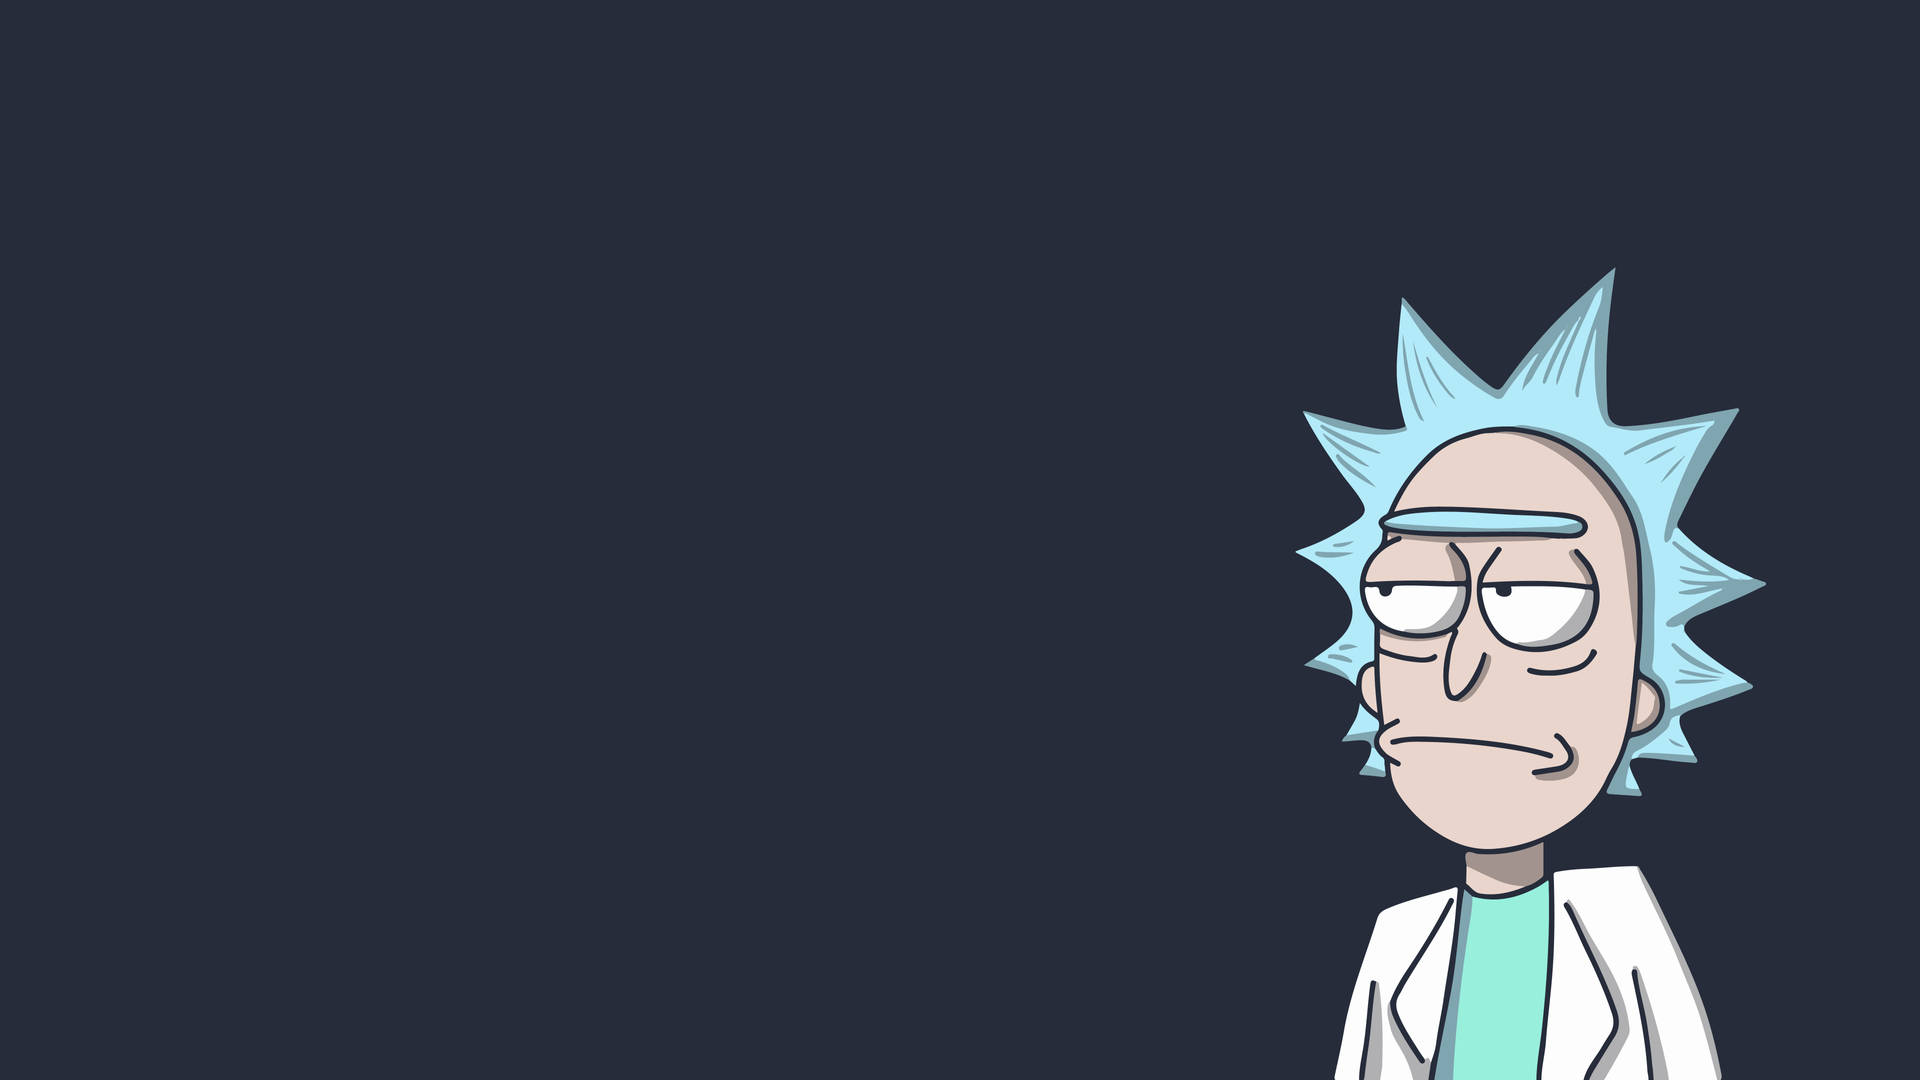 Bored Rick And Morty Pc 4k Background